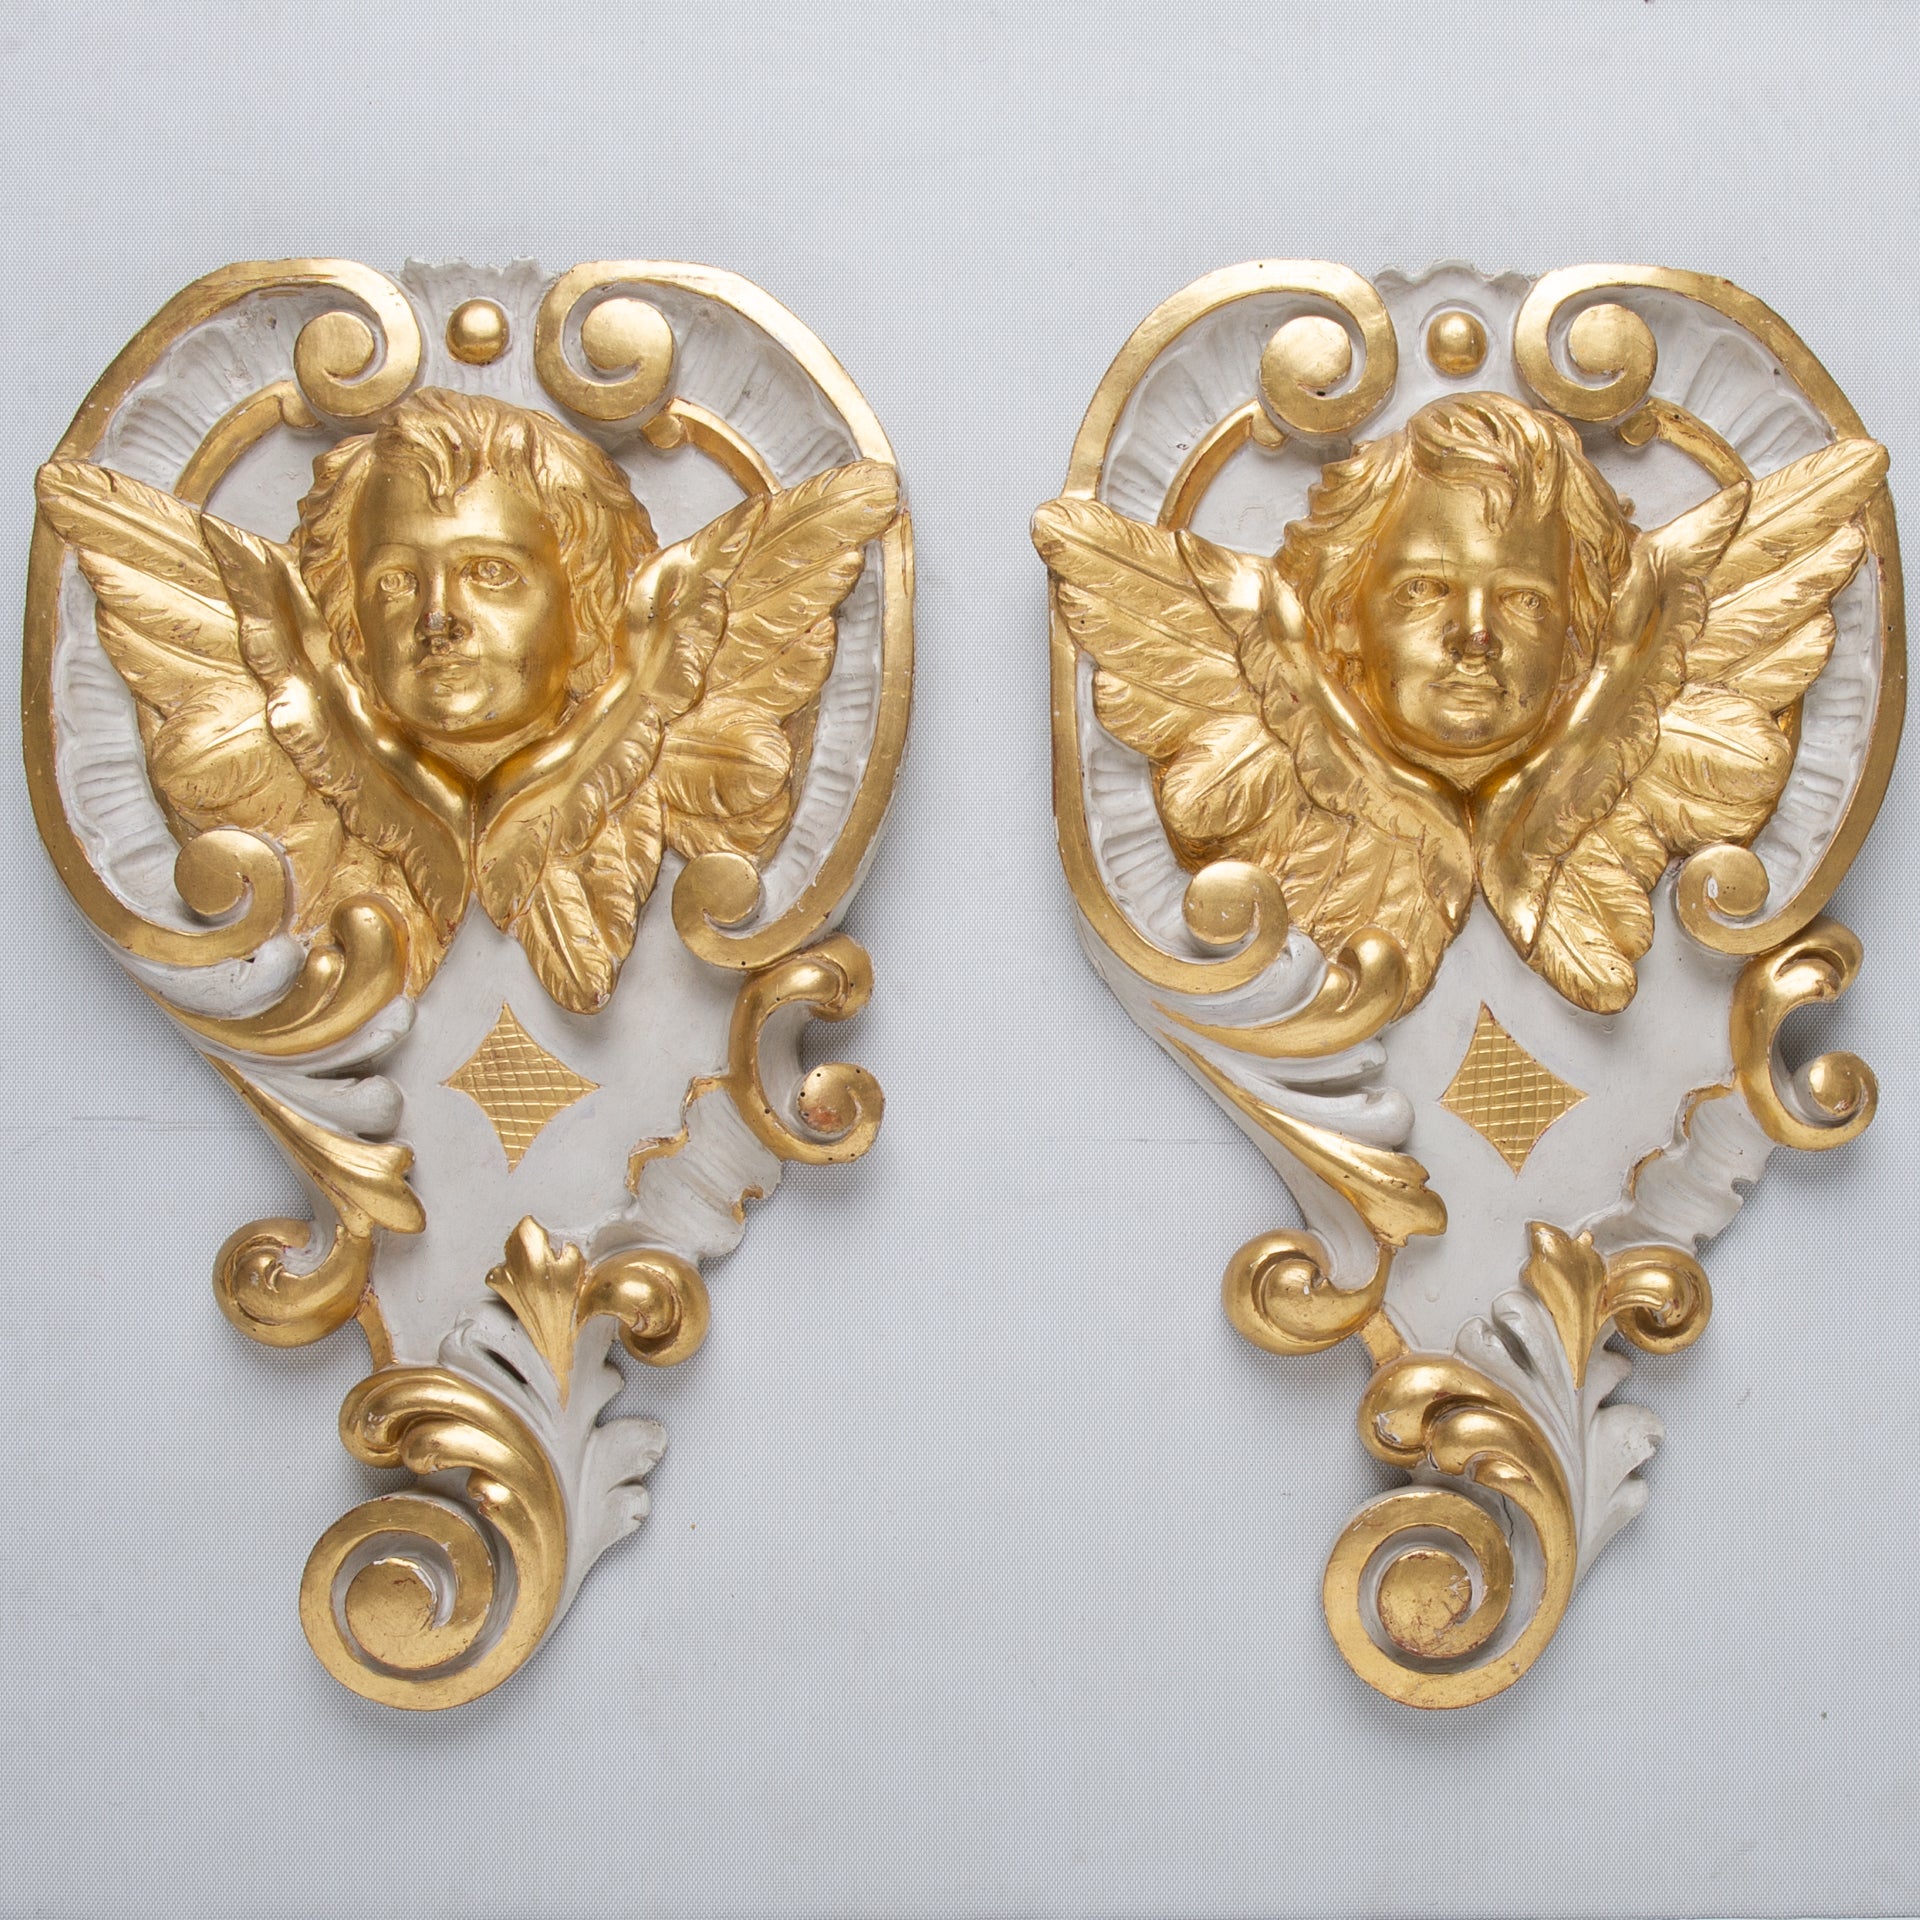 O/4137 -  Pair or large wooden freezes with cherub angels, lacquered and golden.
Observed closely, the faces of the angles are slightly different, with the typical serene expression of children.
From these details it is clear that they have been